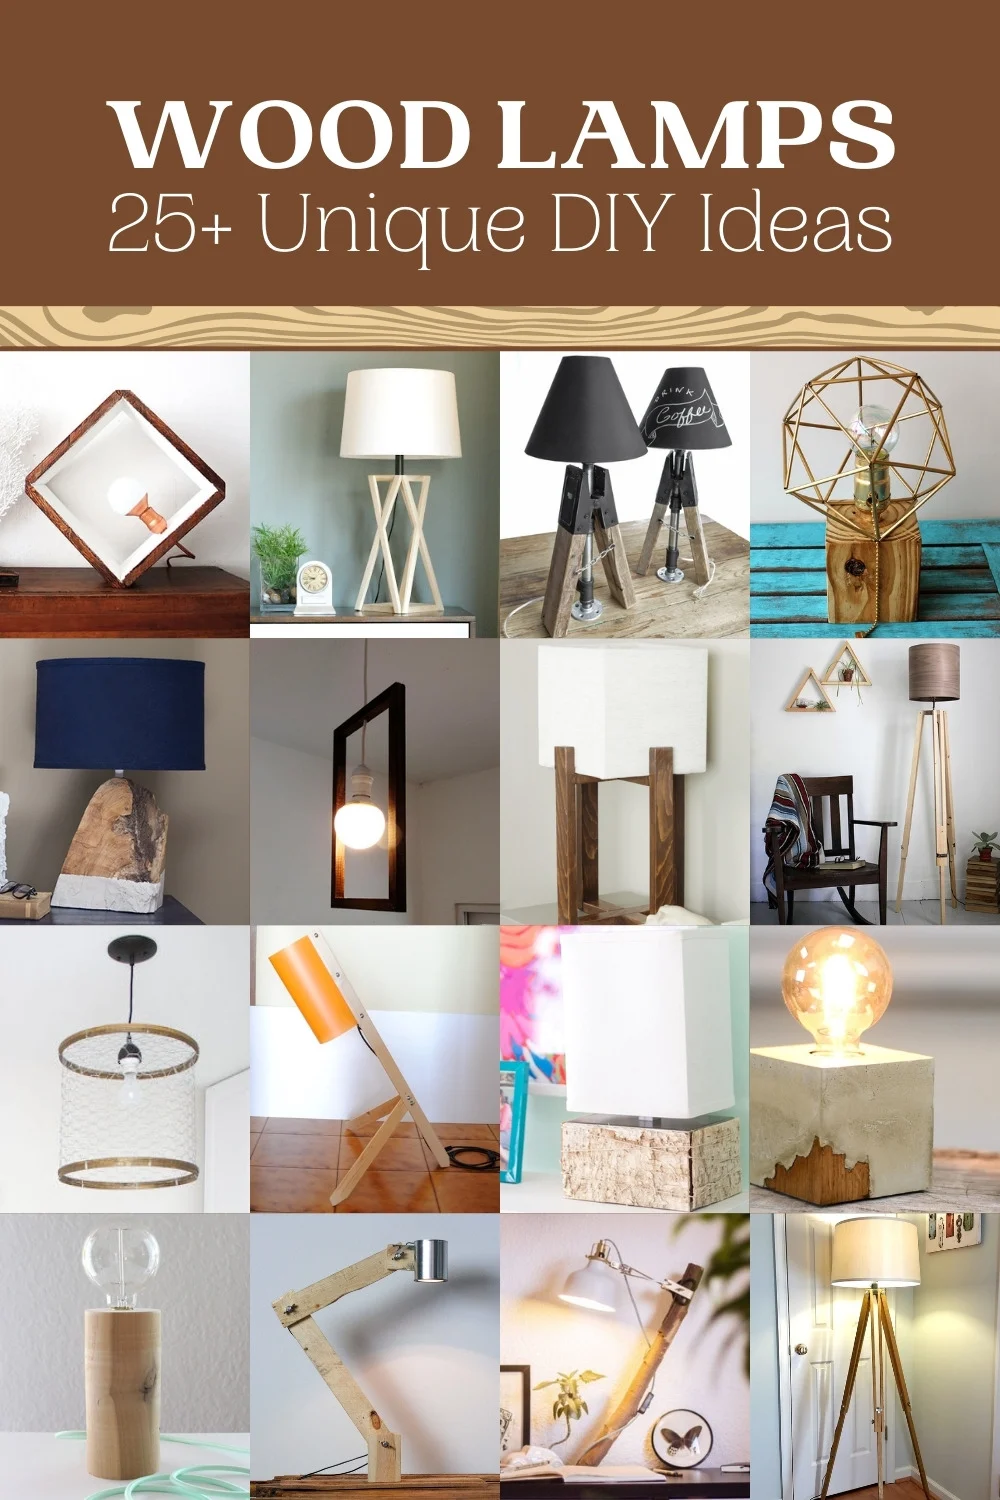 DIY Wood Lamps That Look Amazing Your Home - DIY Candy